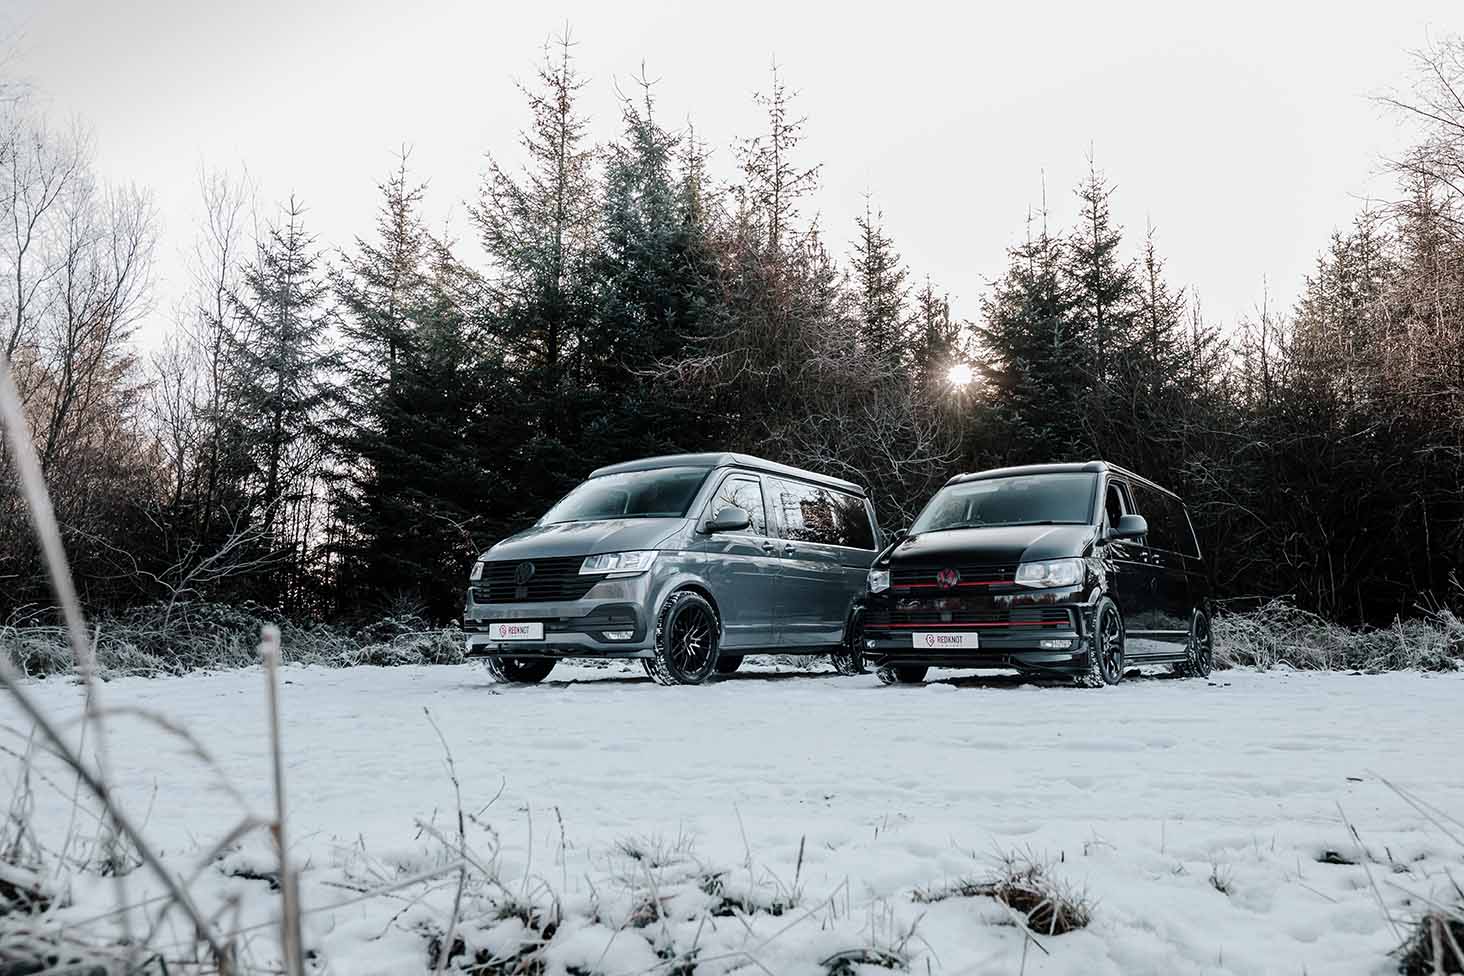 Two Volkswagen campers in the snow